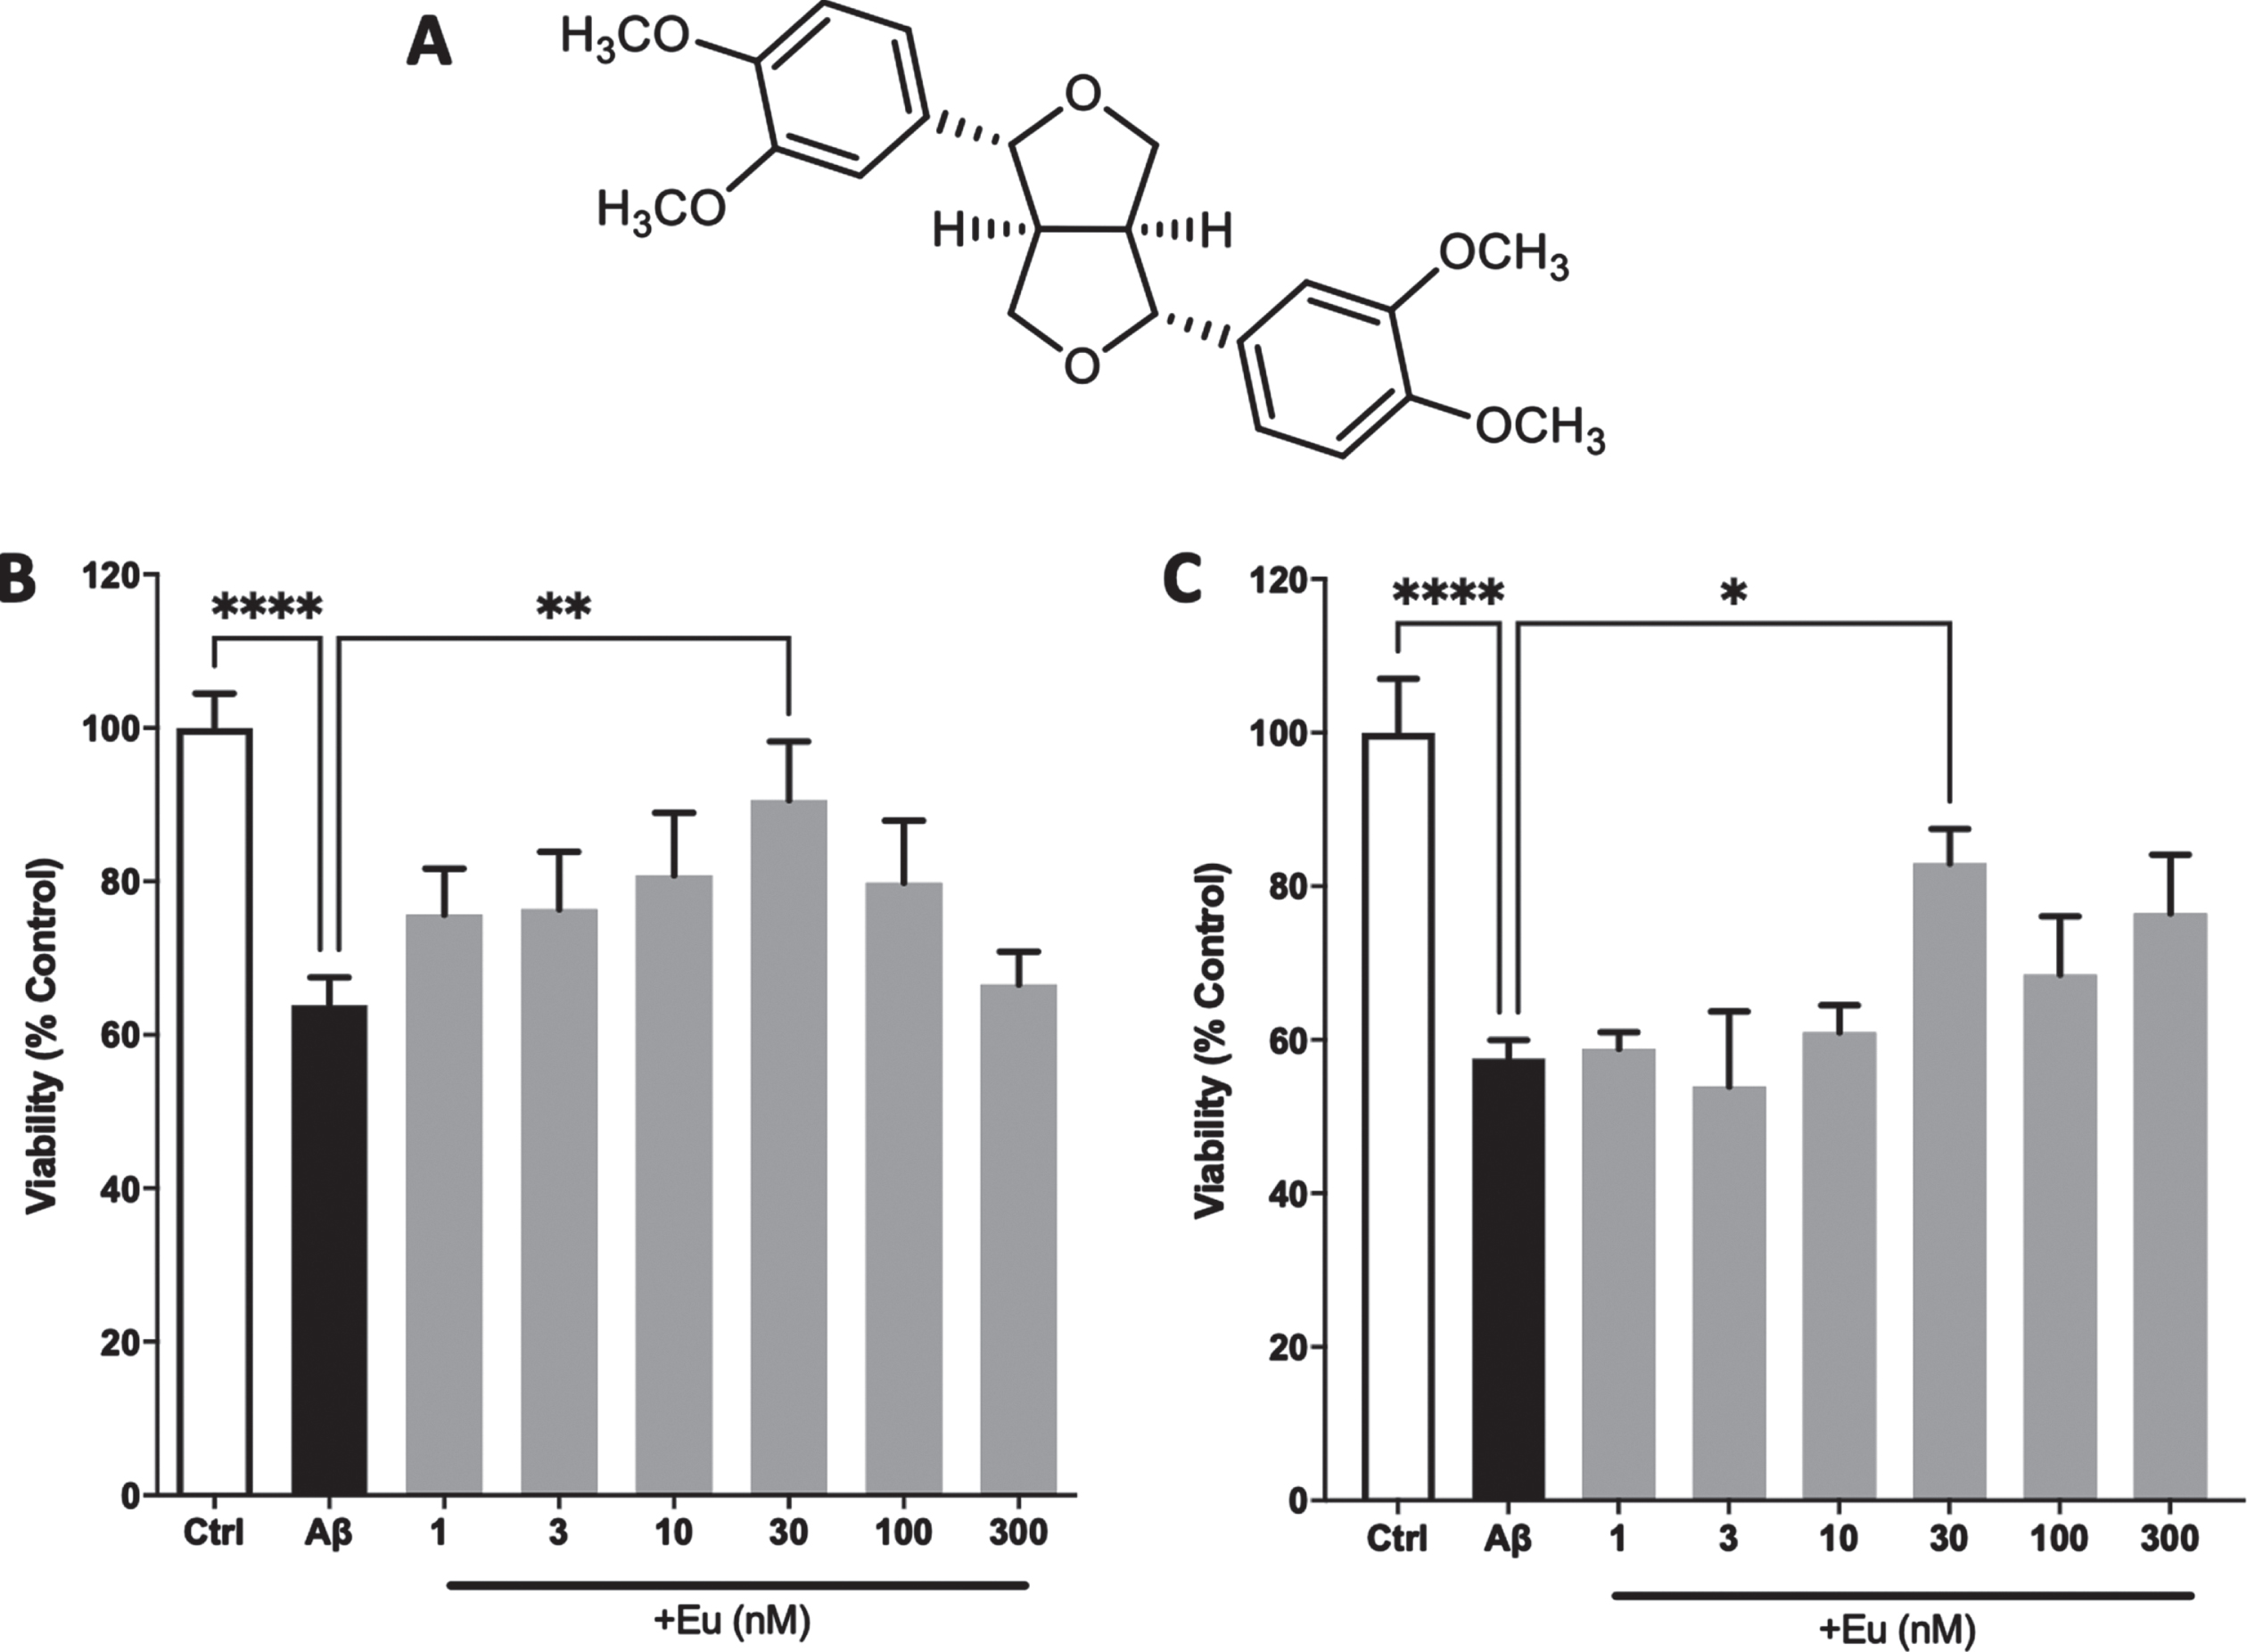 Neuroprotective effect of Eudesmin against AβOs. Chemical structure of Eudesmin (A). PC12 cells (B) and cortical neurons (C) were co-incubated for 24 h with AβOs (0.5μM) and increasing concentrations of Eudesmin (Eu 1–300 nM). Cellular viability was measured by MTT assay. Values are expressed as the percentage of the control group (without AβOs treatment). *p < 0.05, **p < 0.01, ****p < 0.0001. n = 3.